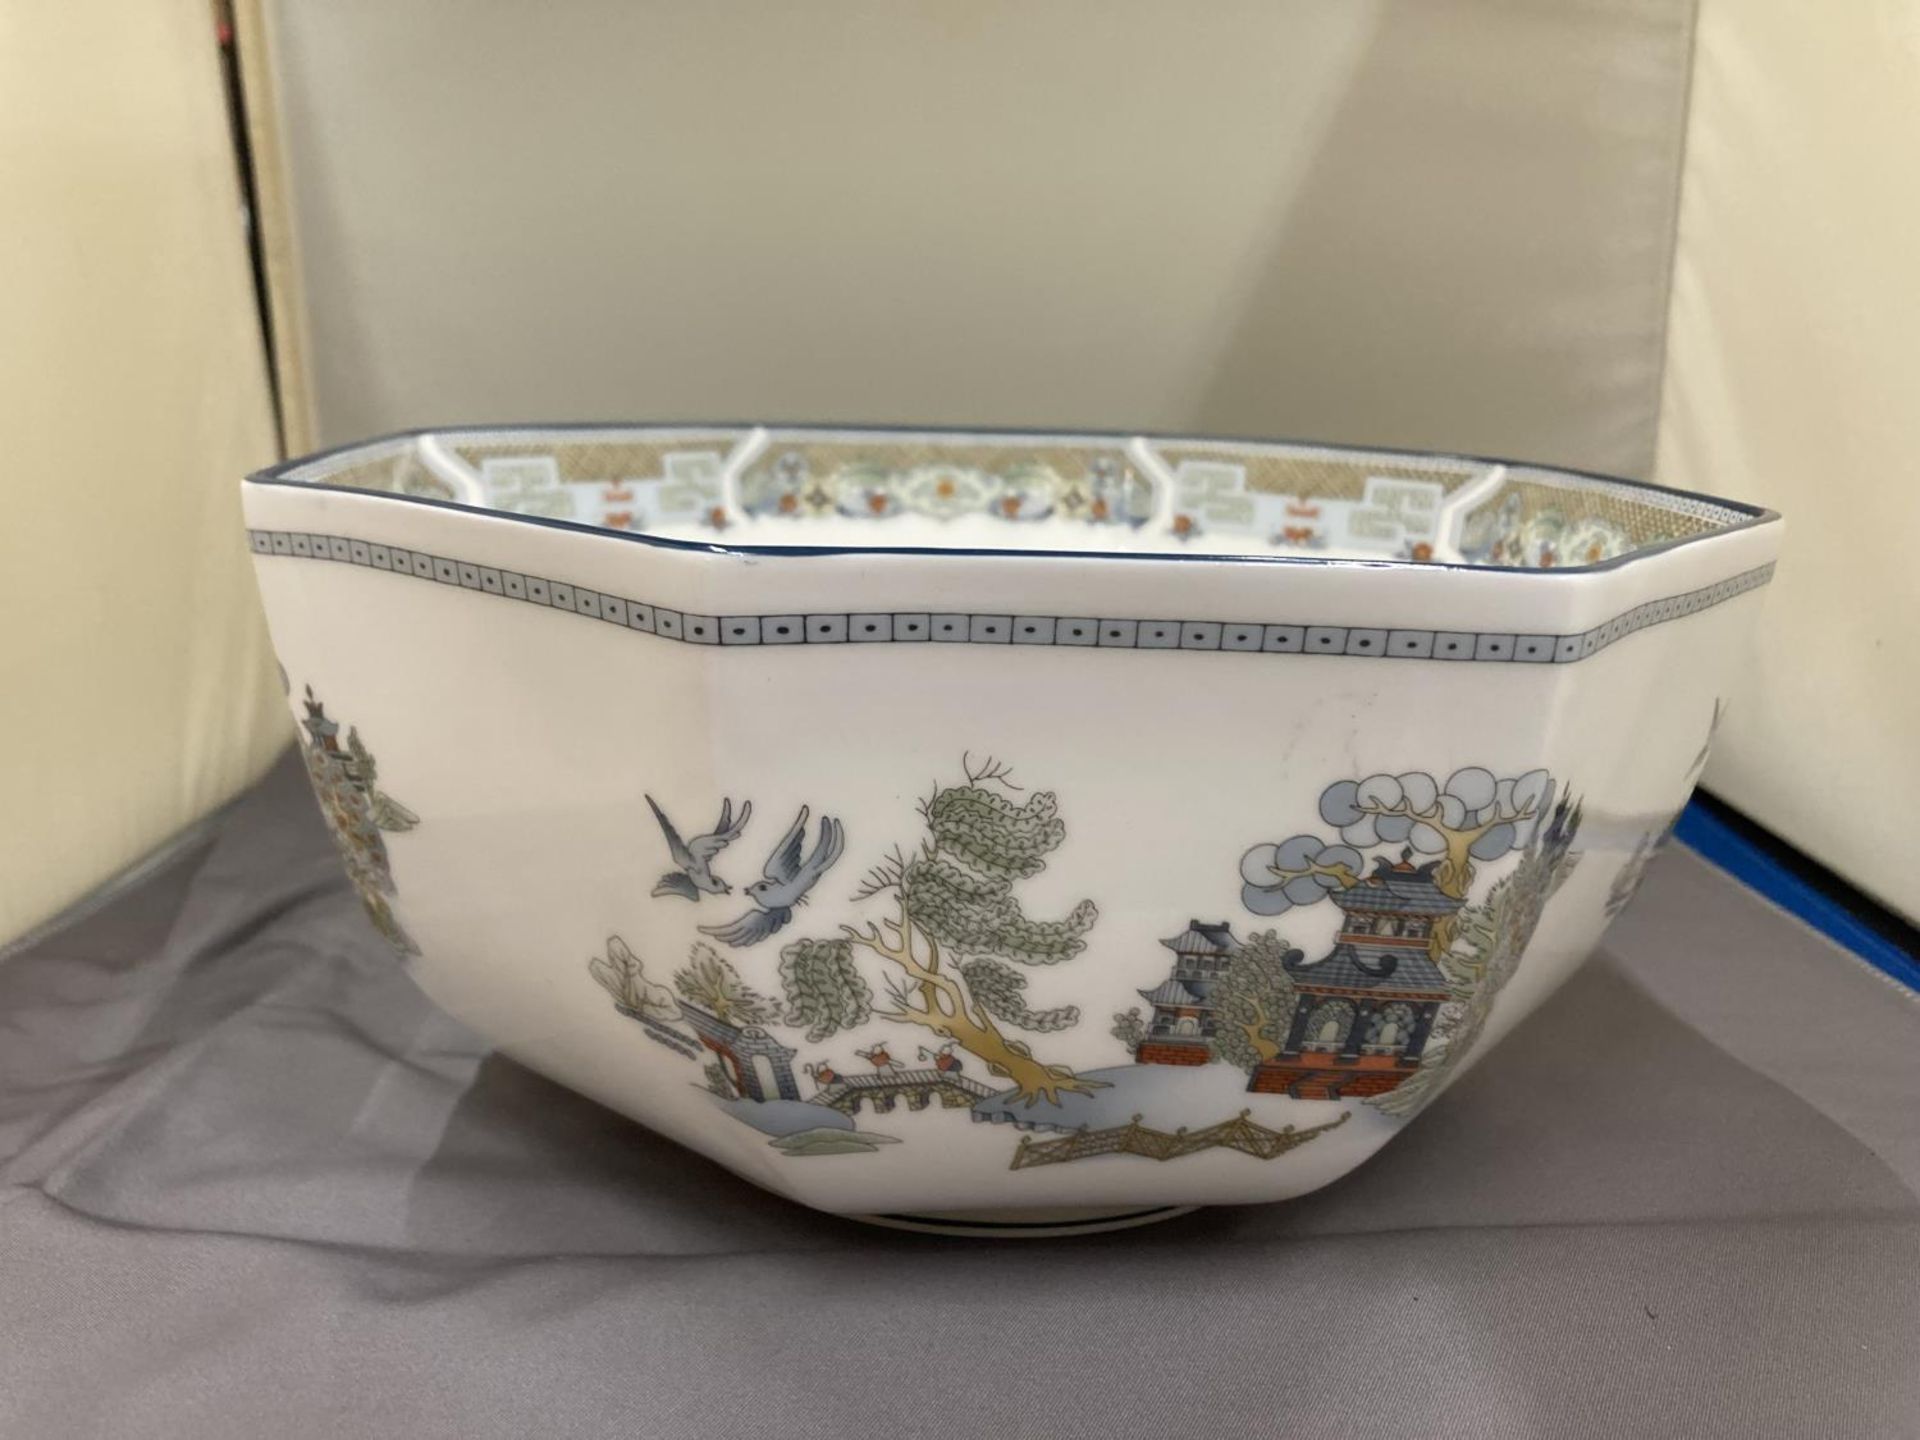 A WEDGWOOD "CHINESE LEGEND" OCTAGONAL BOWL - Image 2 of 4